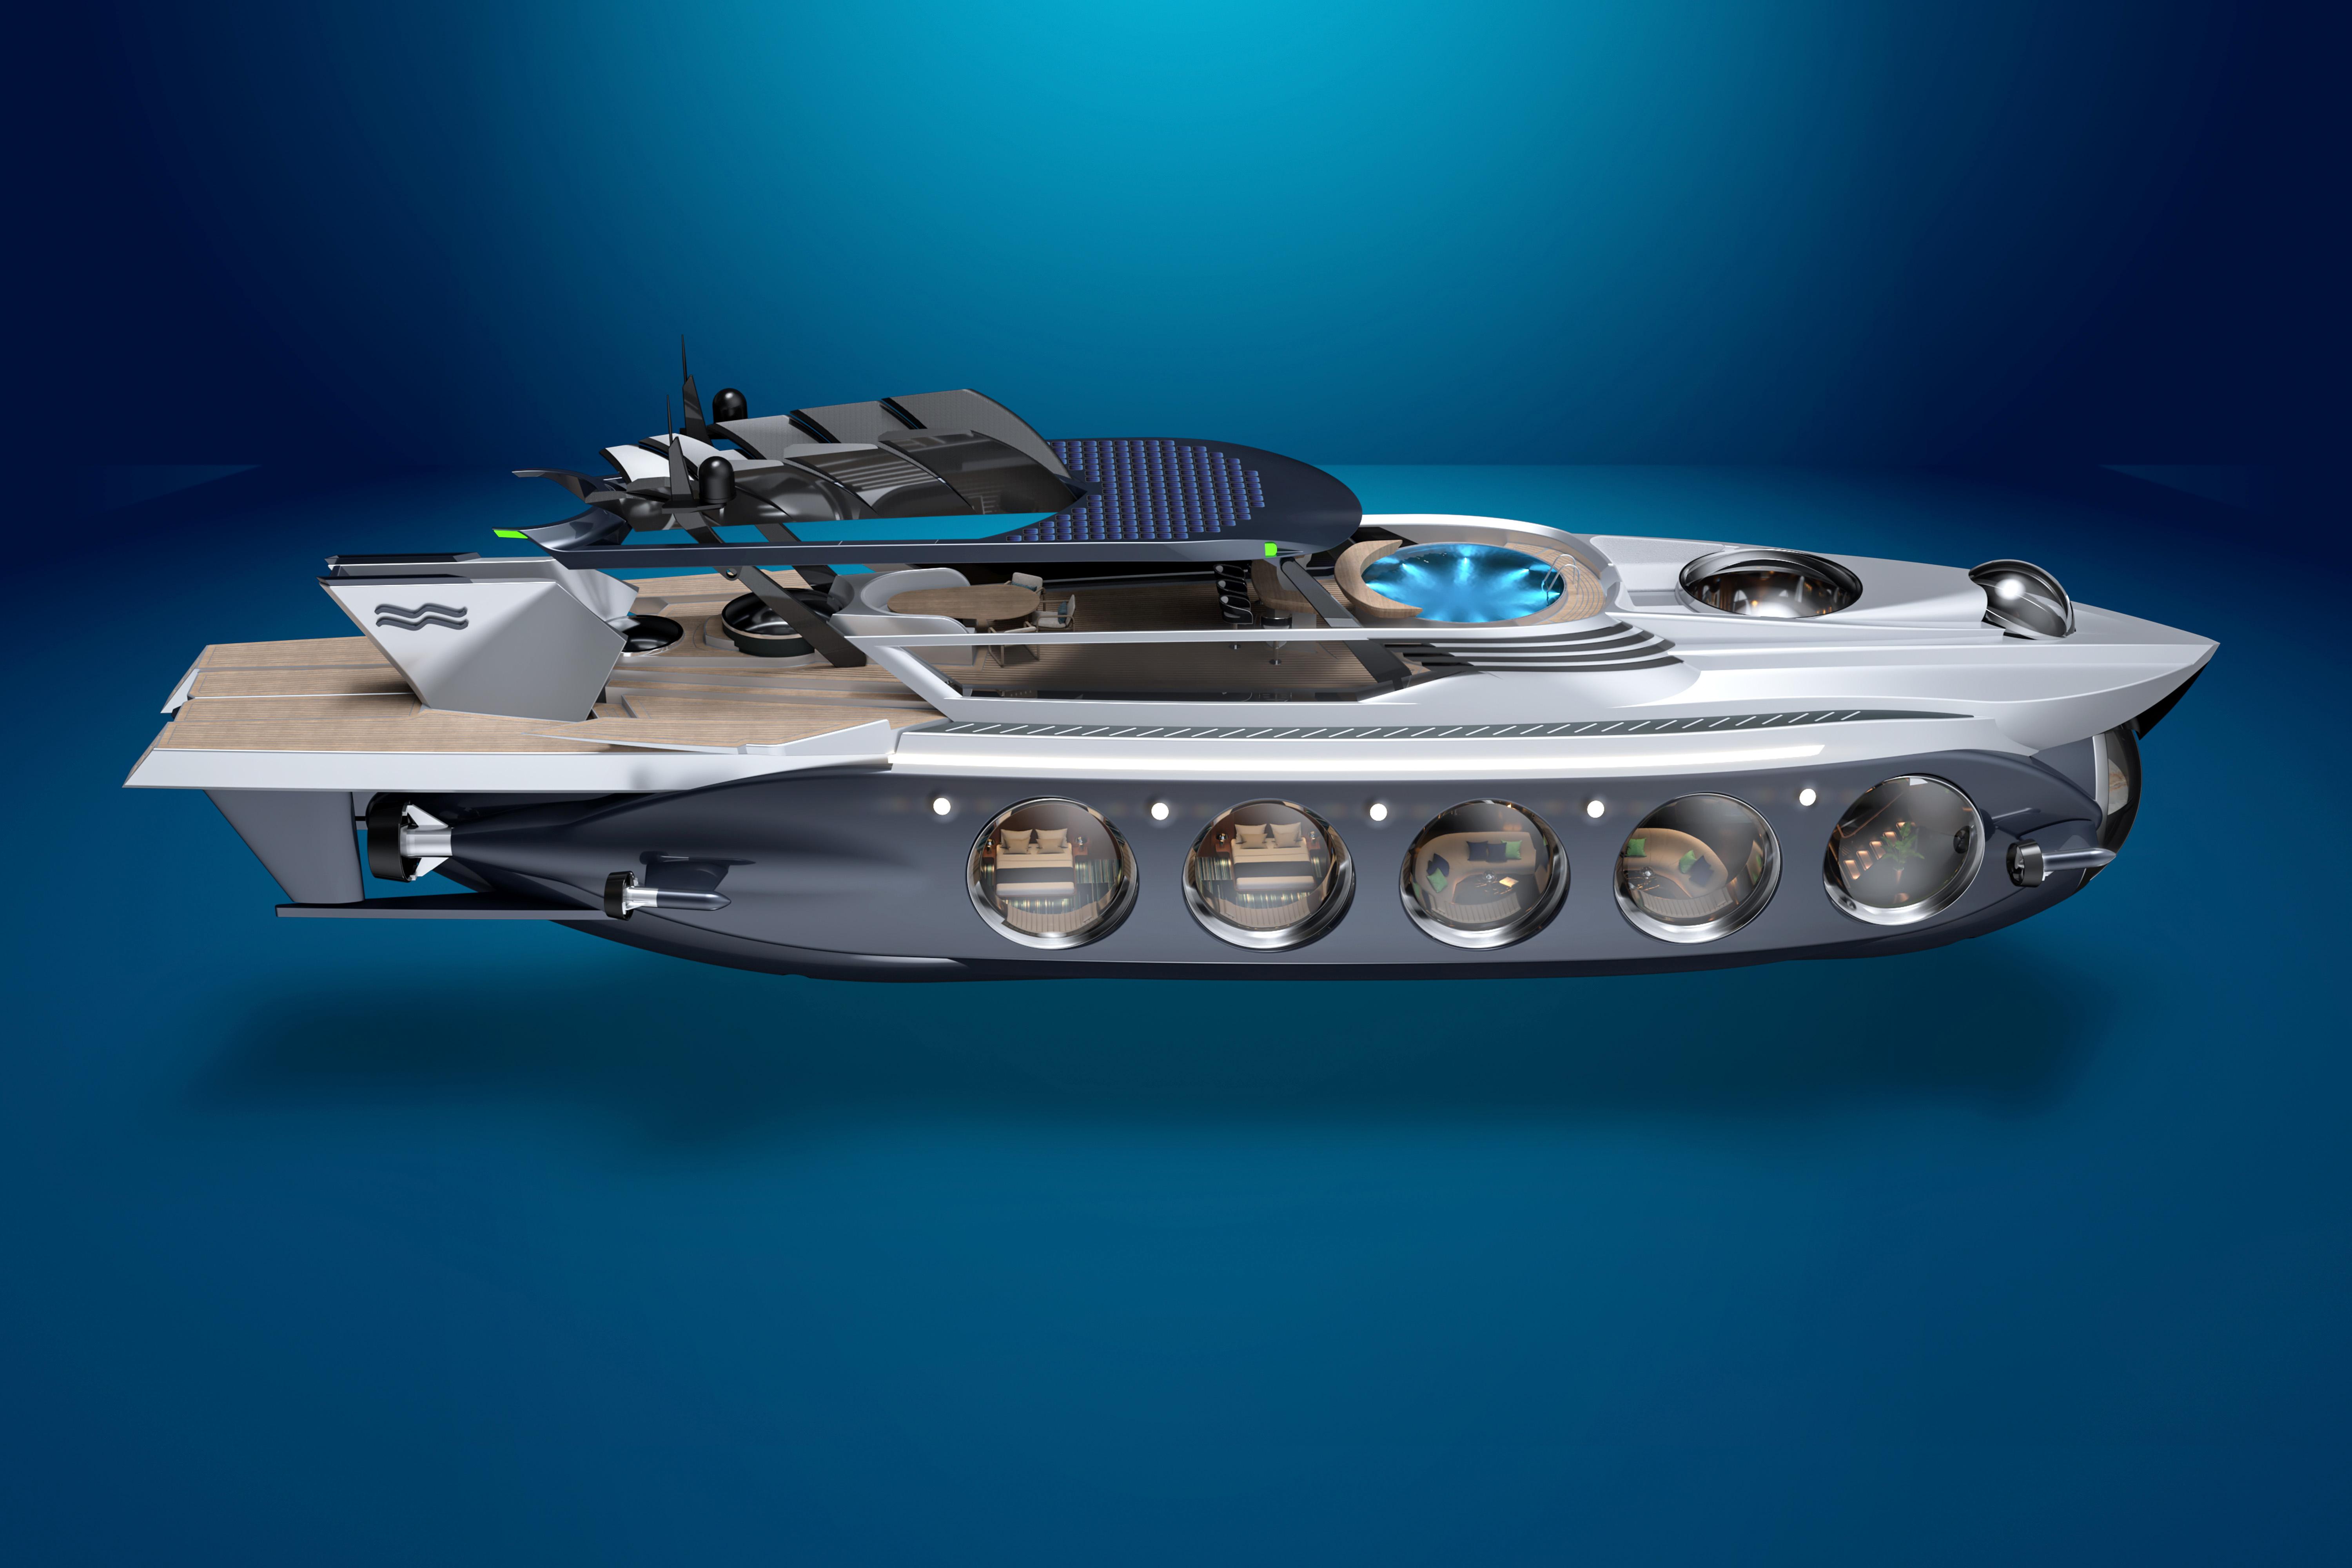 U-Boat Worx Releases Interior Design for their Nautilus Yacht Submarine -  U-Boat Worx - U-Boat Worx